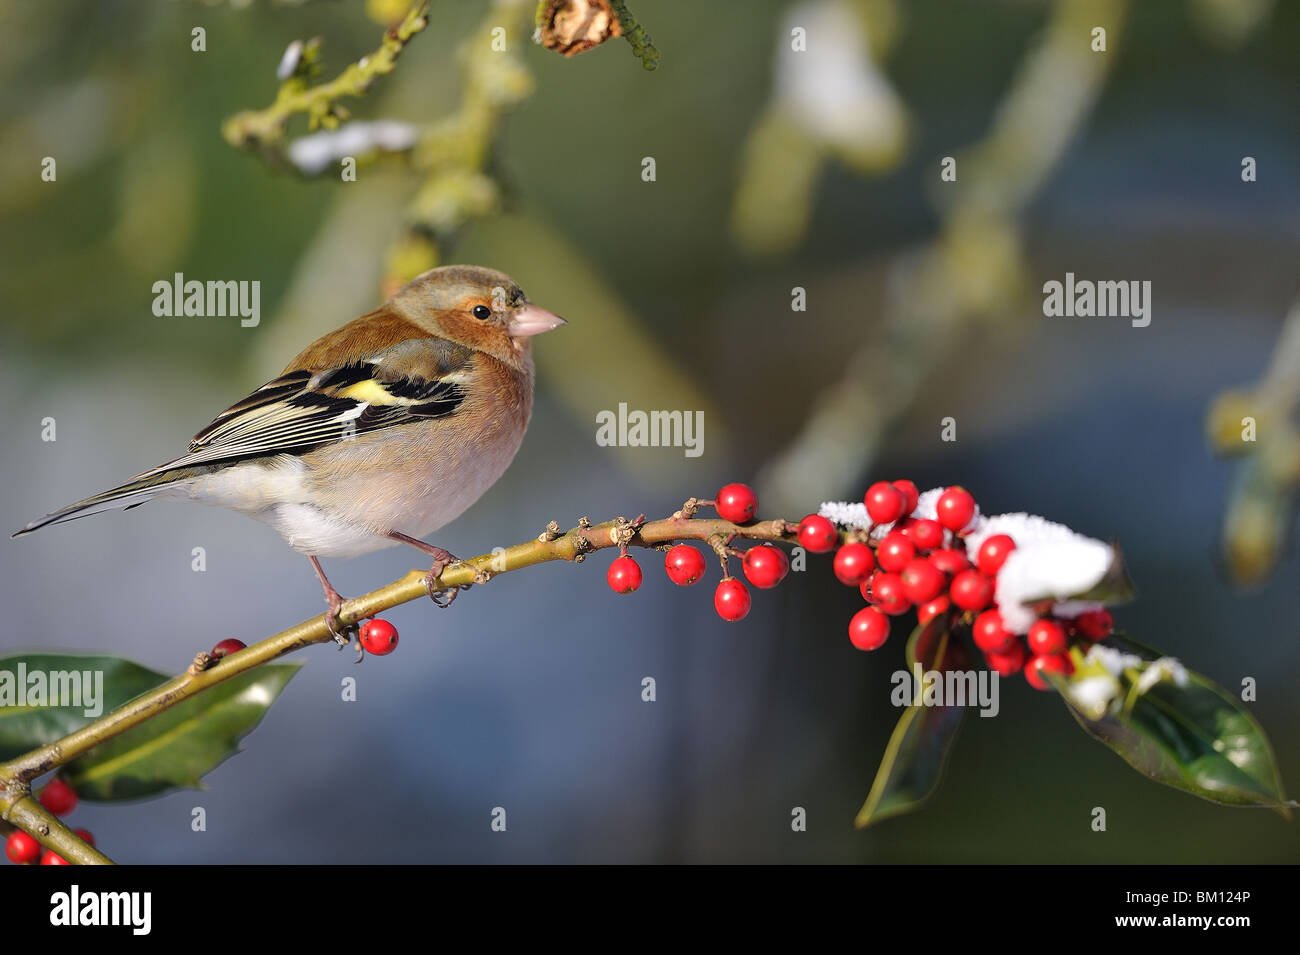 Male chaffinch perched on a branch of holly in winter Stock Photo